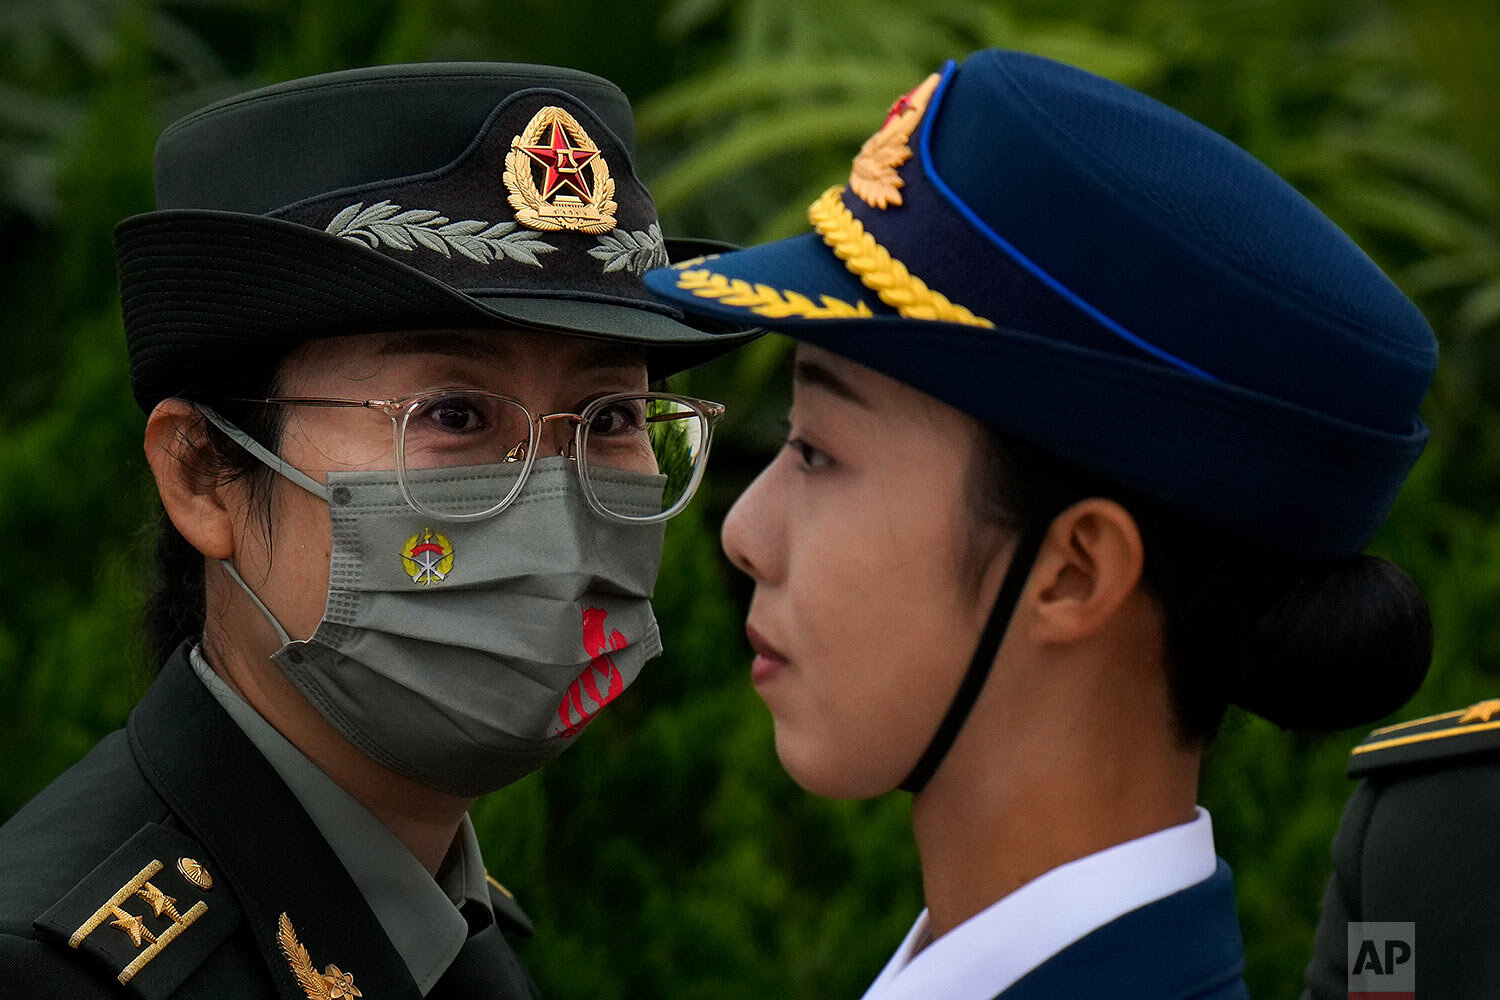  A female military officer wearing a face mask to help protect from the coronavirus looks at a female member of an honor guard standing on Tiananmen Square during a ceremony to mark Martyr's Day in Beijing, Thursday, Sept. 30, 2021. (AP Photo/Andy Wo